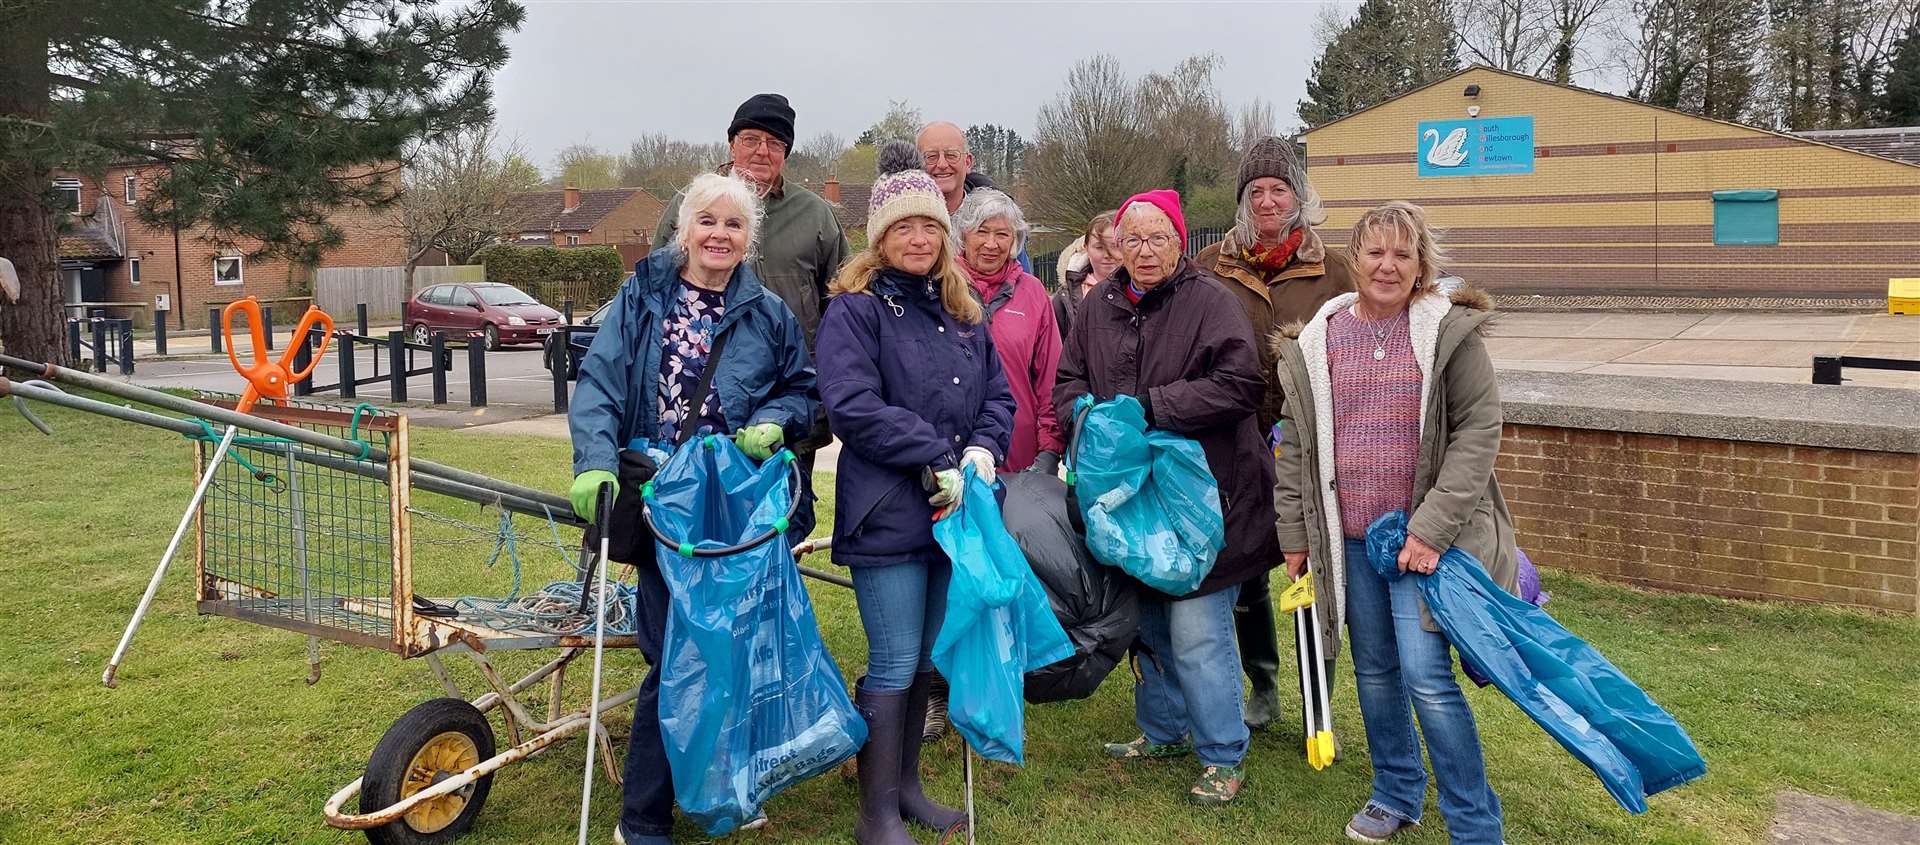 The South Willesborough Litter Pickers